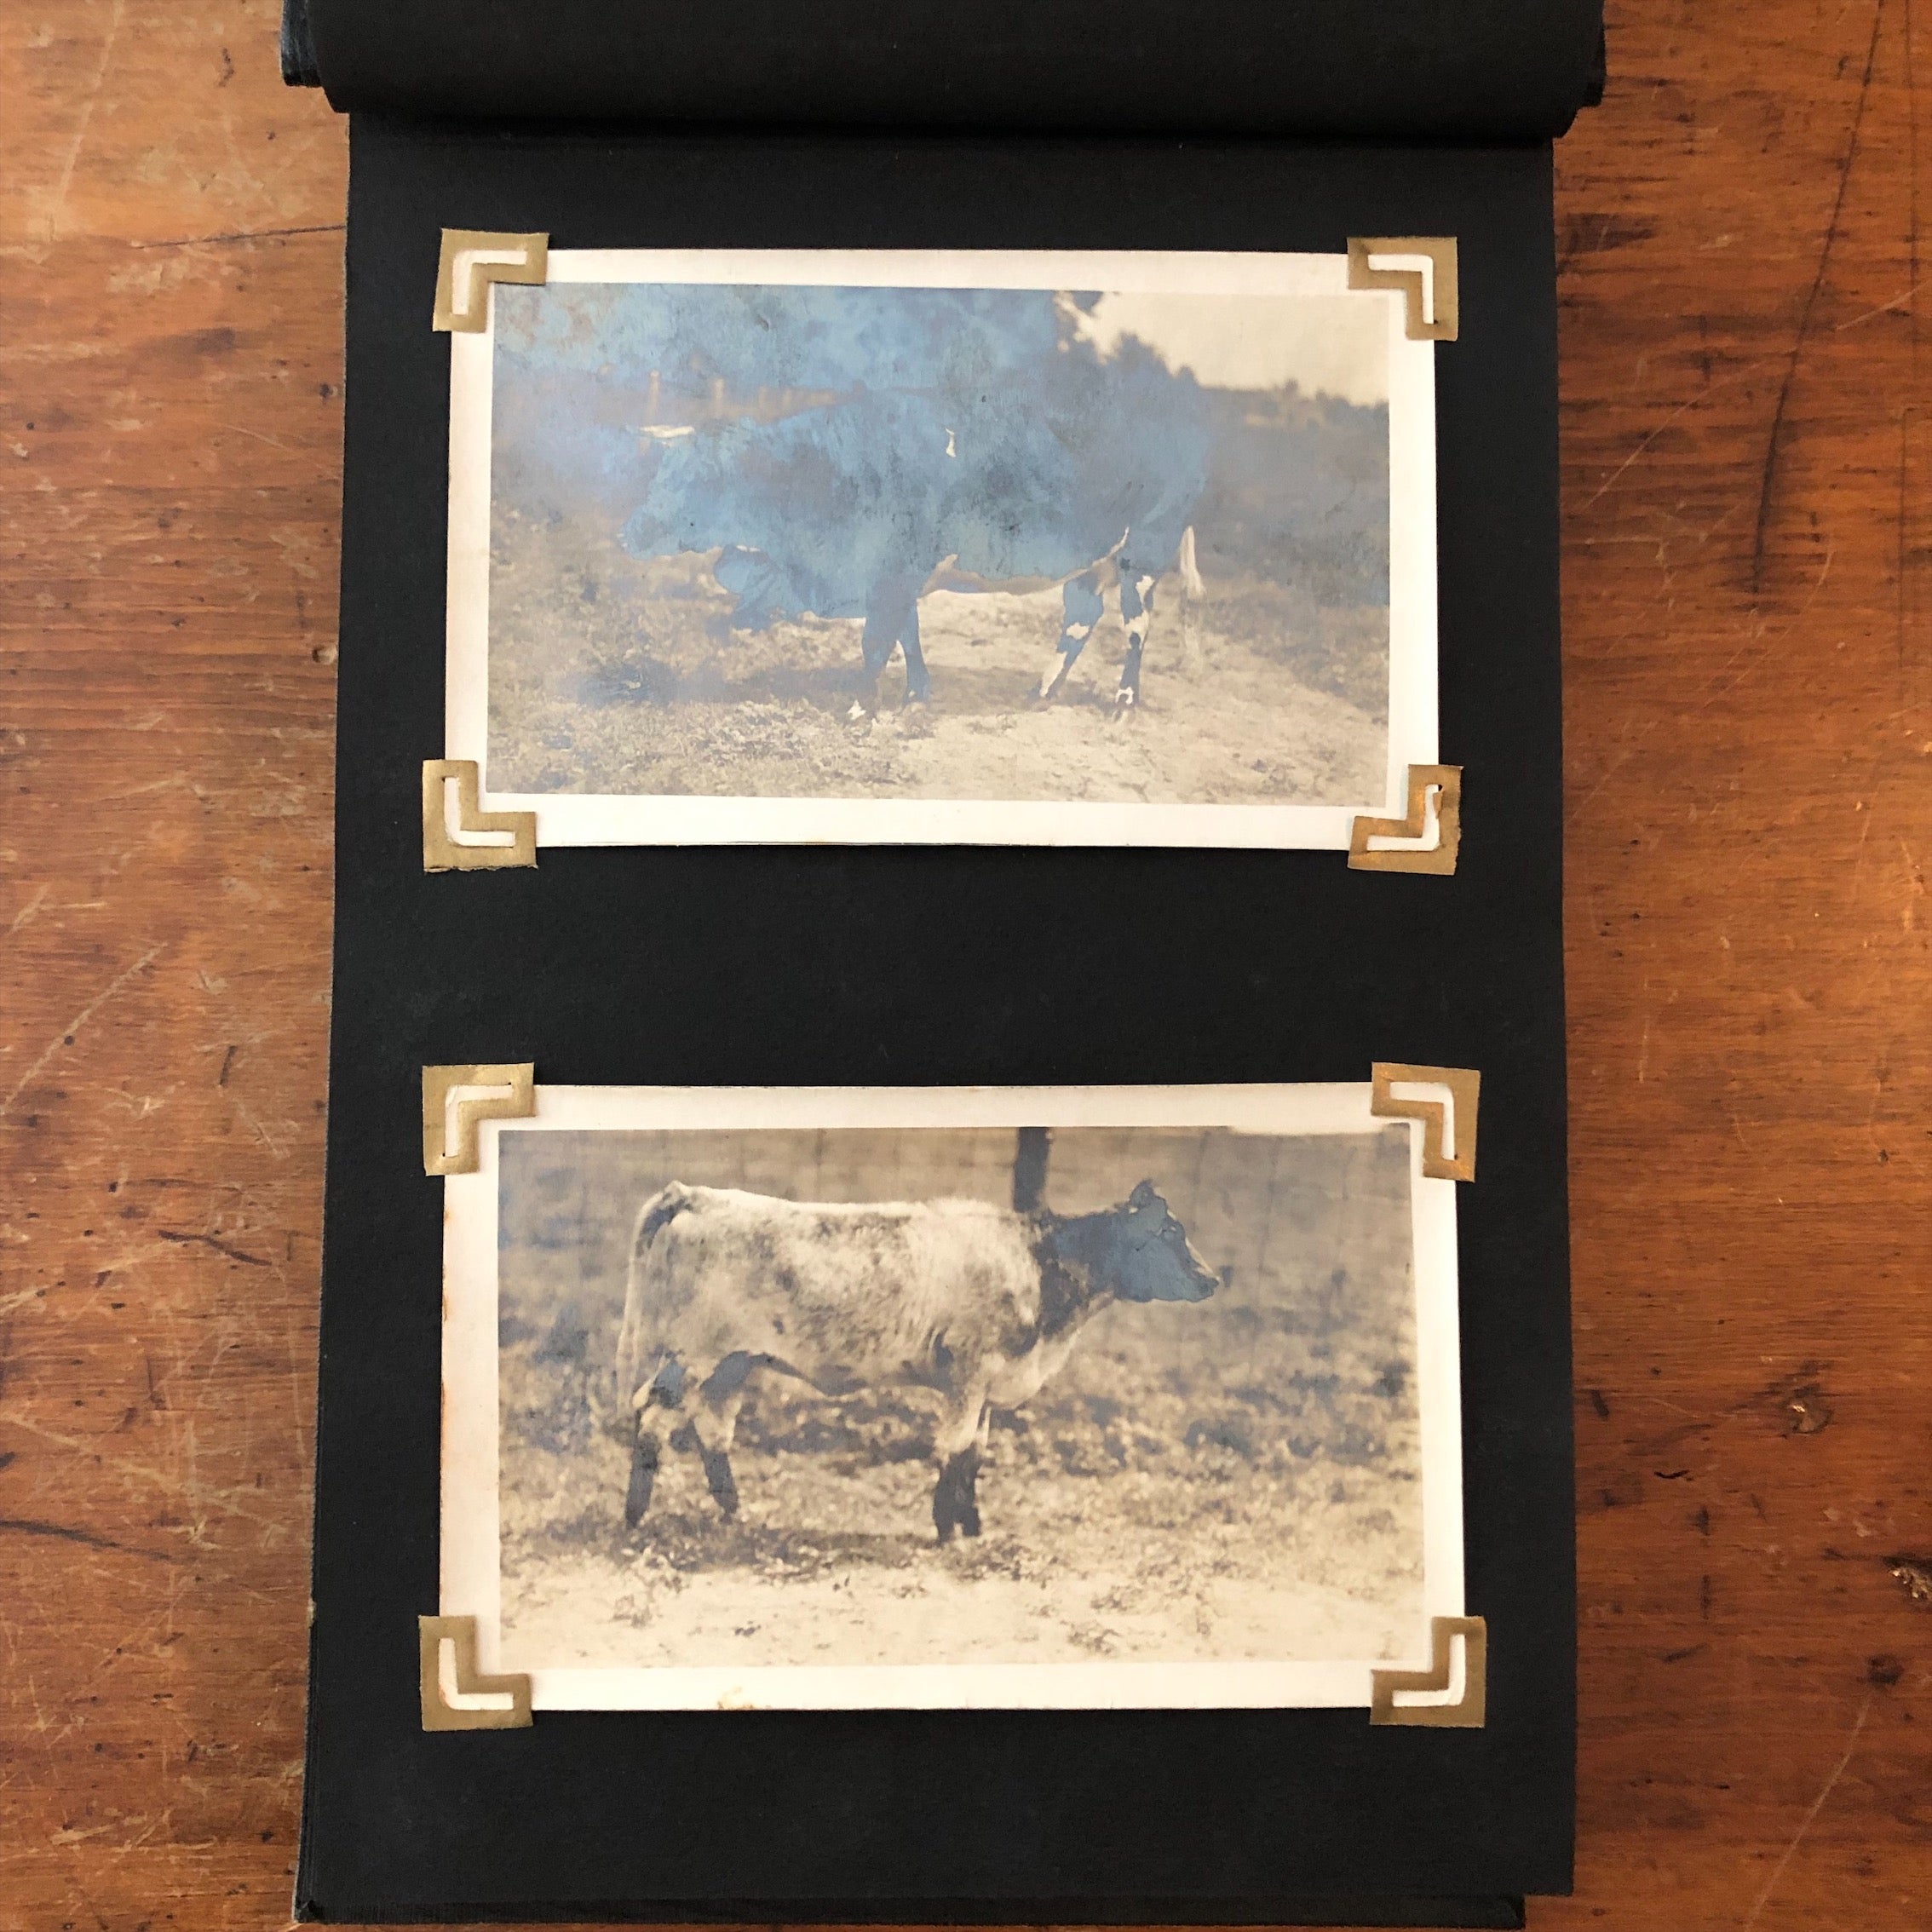 Antique Bovine Photograph Album - Early 1900s - James J. Hill - Early Cow Photography 